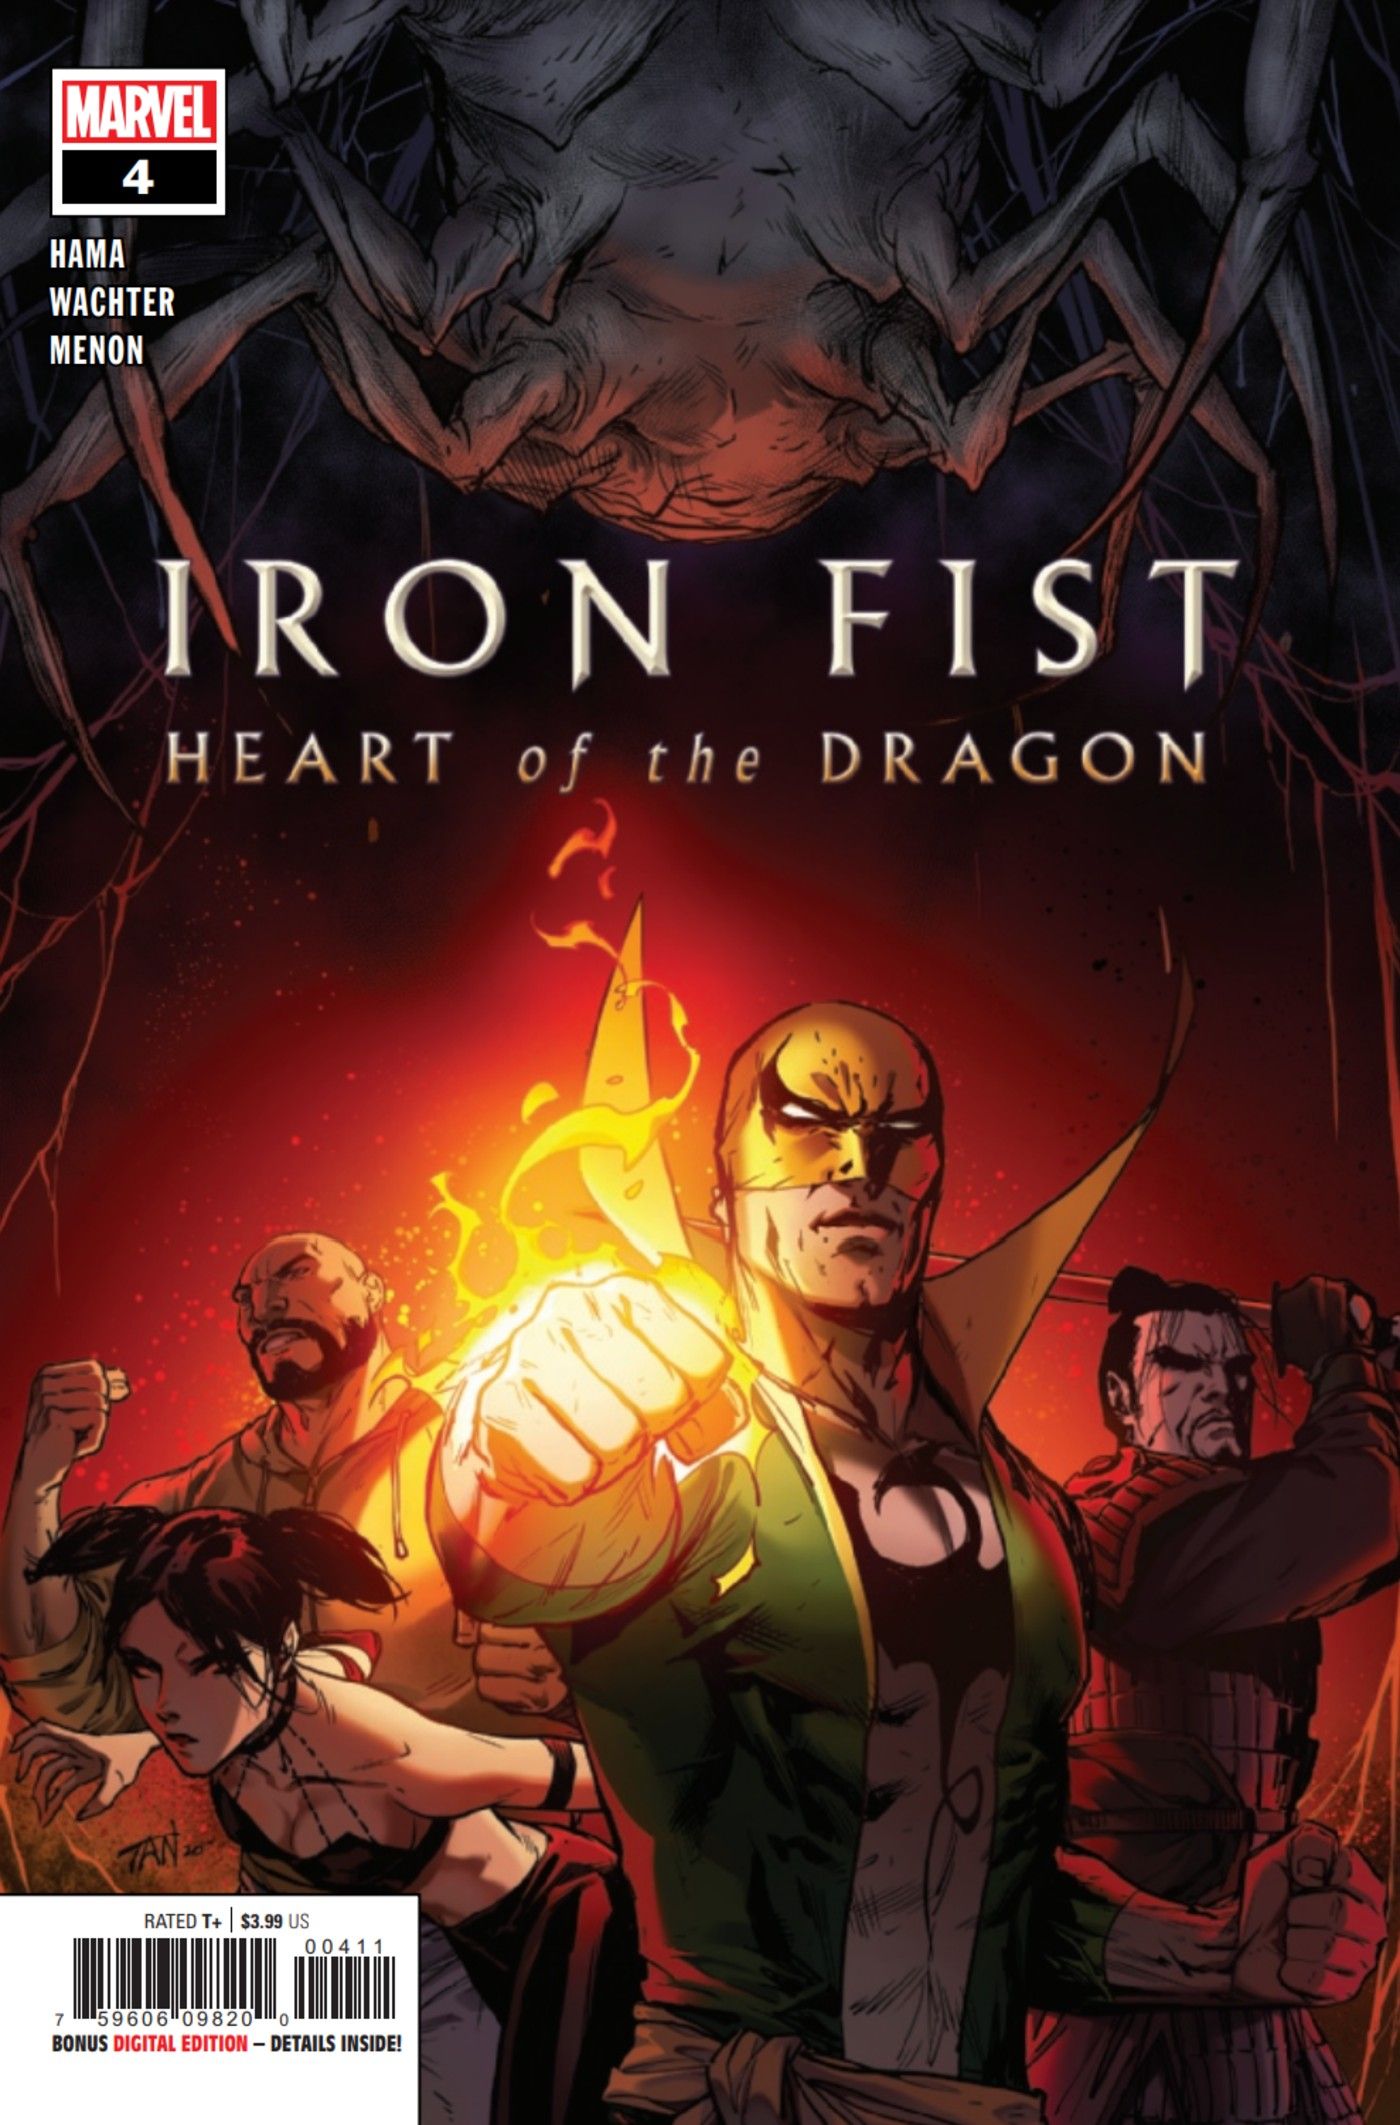 Iron Fist Heart of the Dragon 4 preview cover